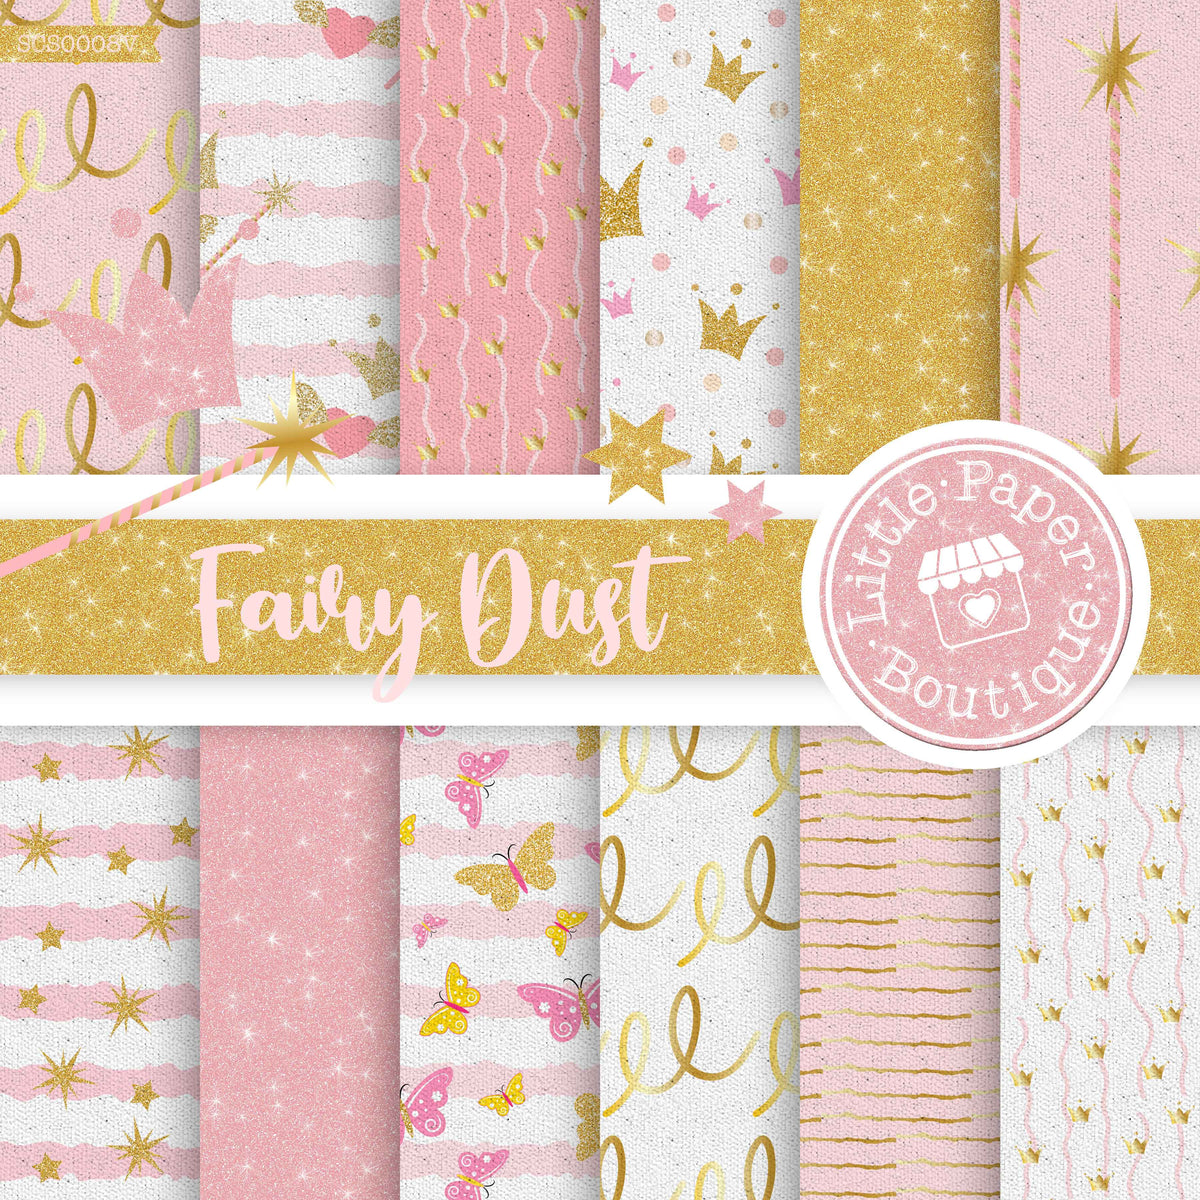 Doodle Digital Papers, Pink Yellow & Navy Boho Scandi Digital Paper Pack,  Hand drawn Patterns, Digital Scrapbooking Paper, Commercial Use